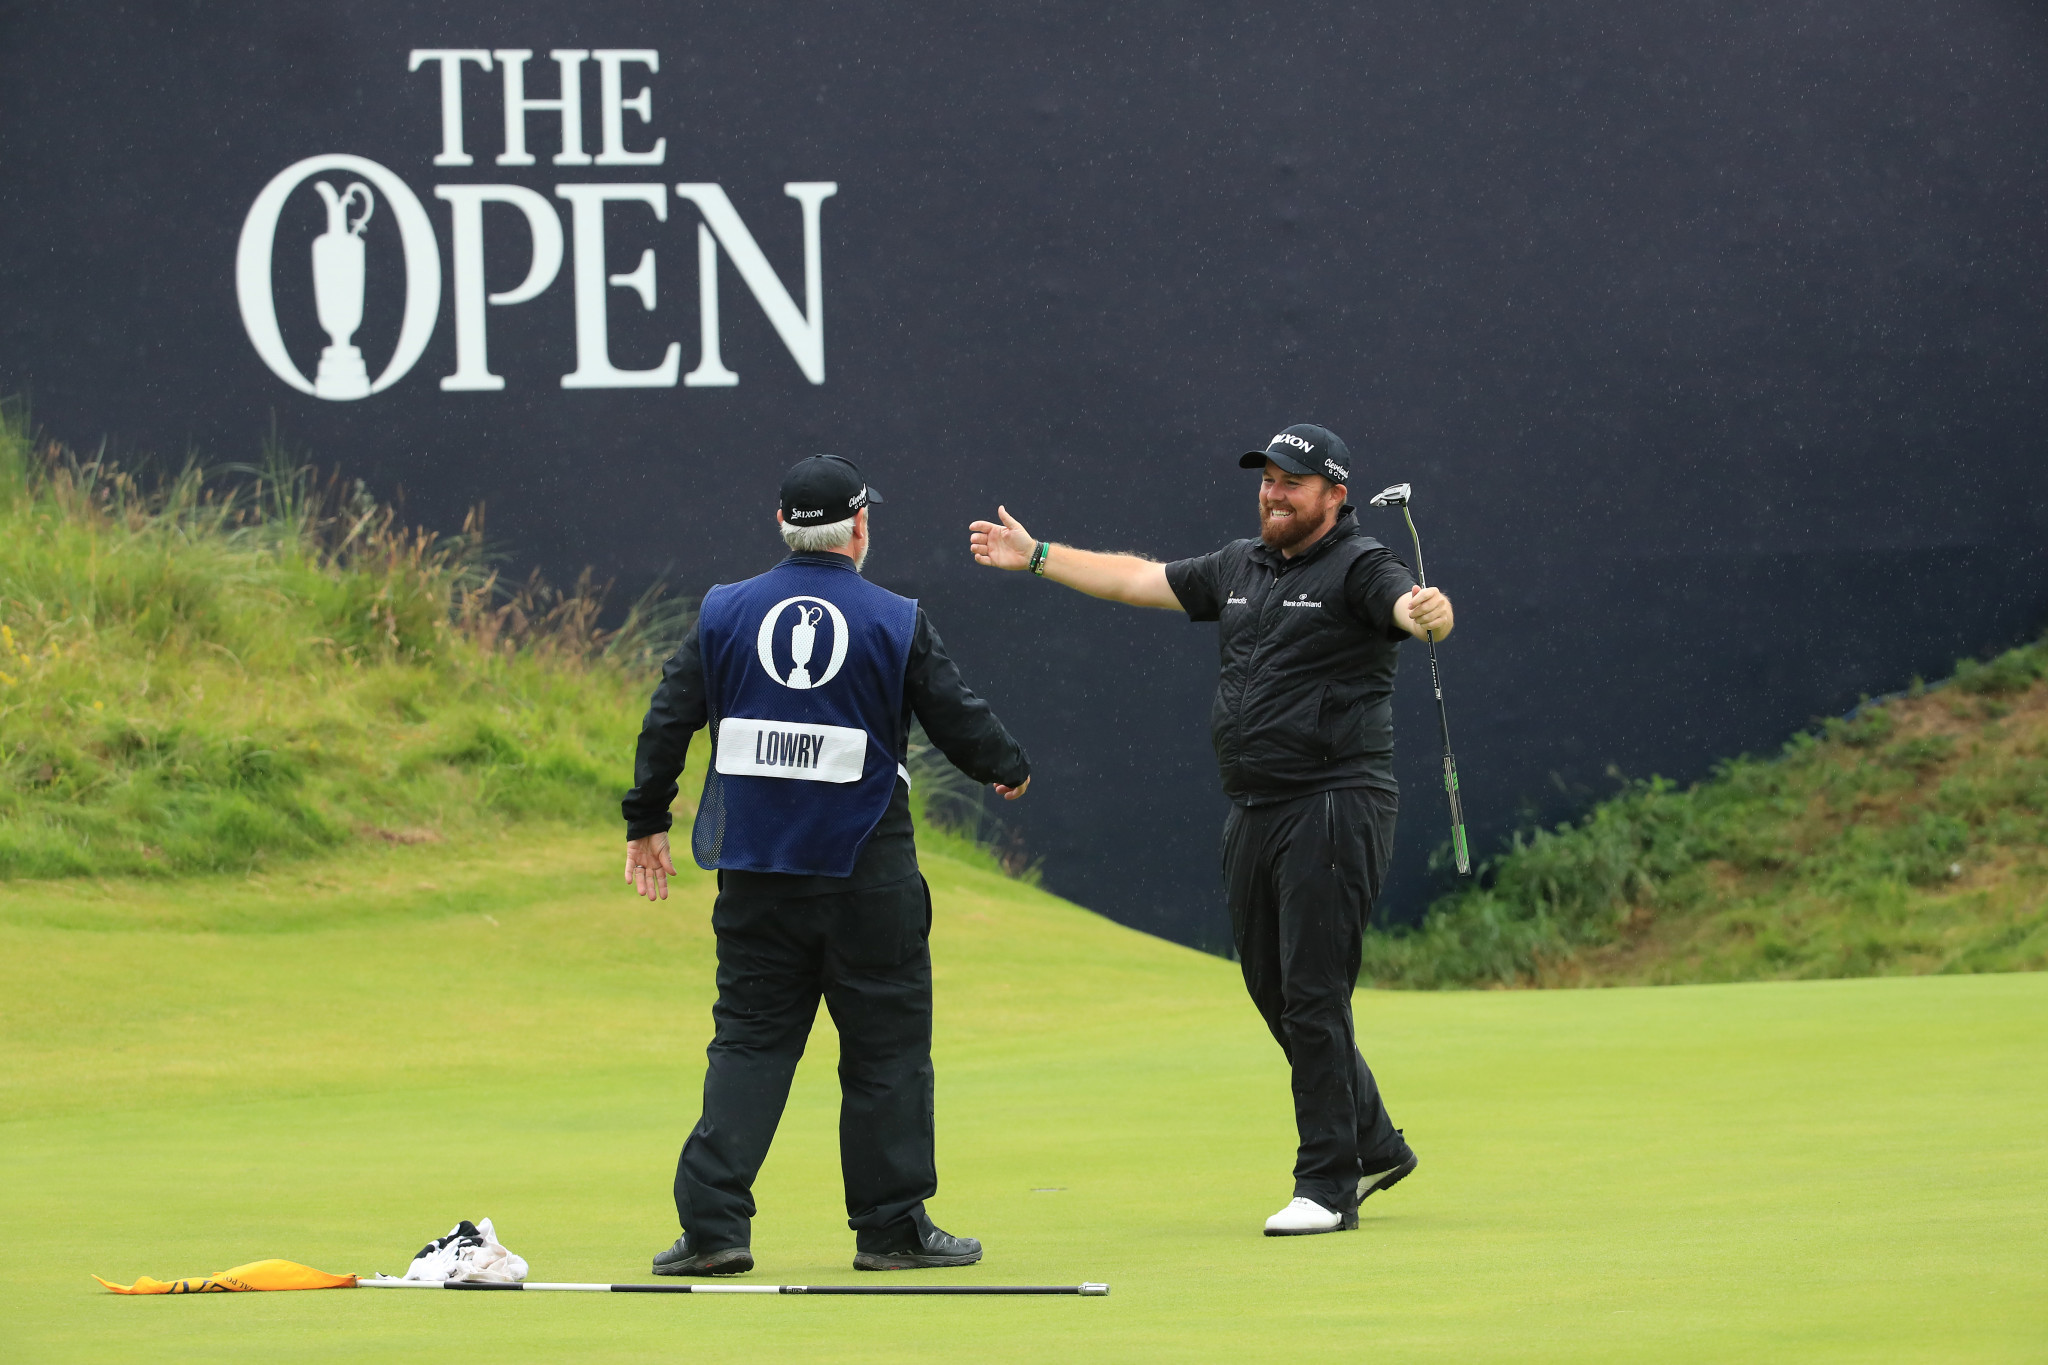 Shane Lowry is the defending champion at The Open ©Getty Images